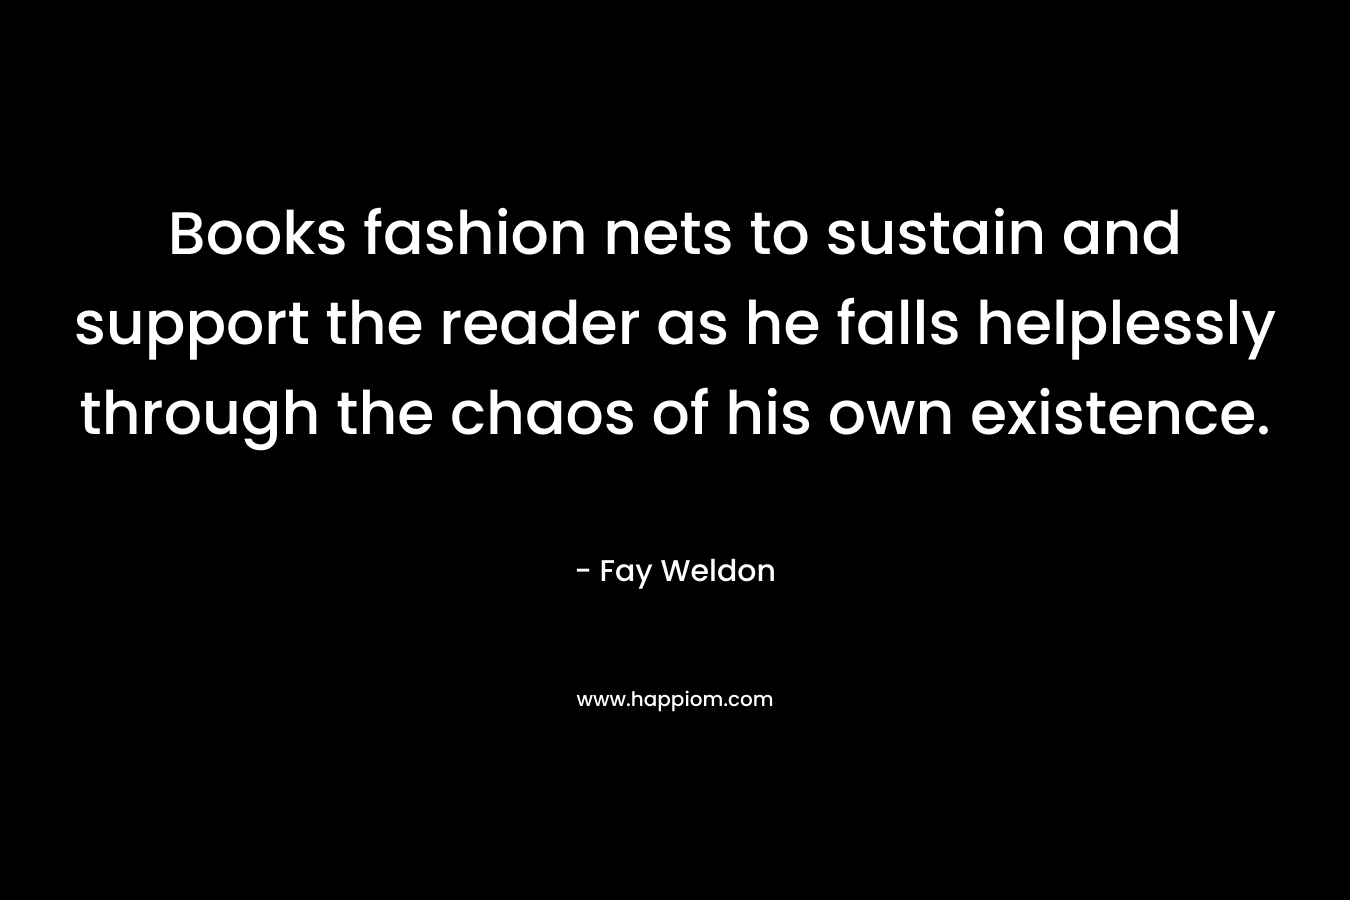 Books fashion nets to sustain and support the reader as he falls helplessly through the chaos of his own existence. – Fay Weldon